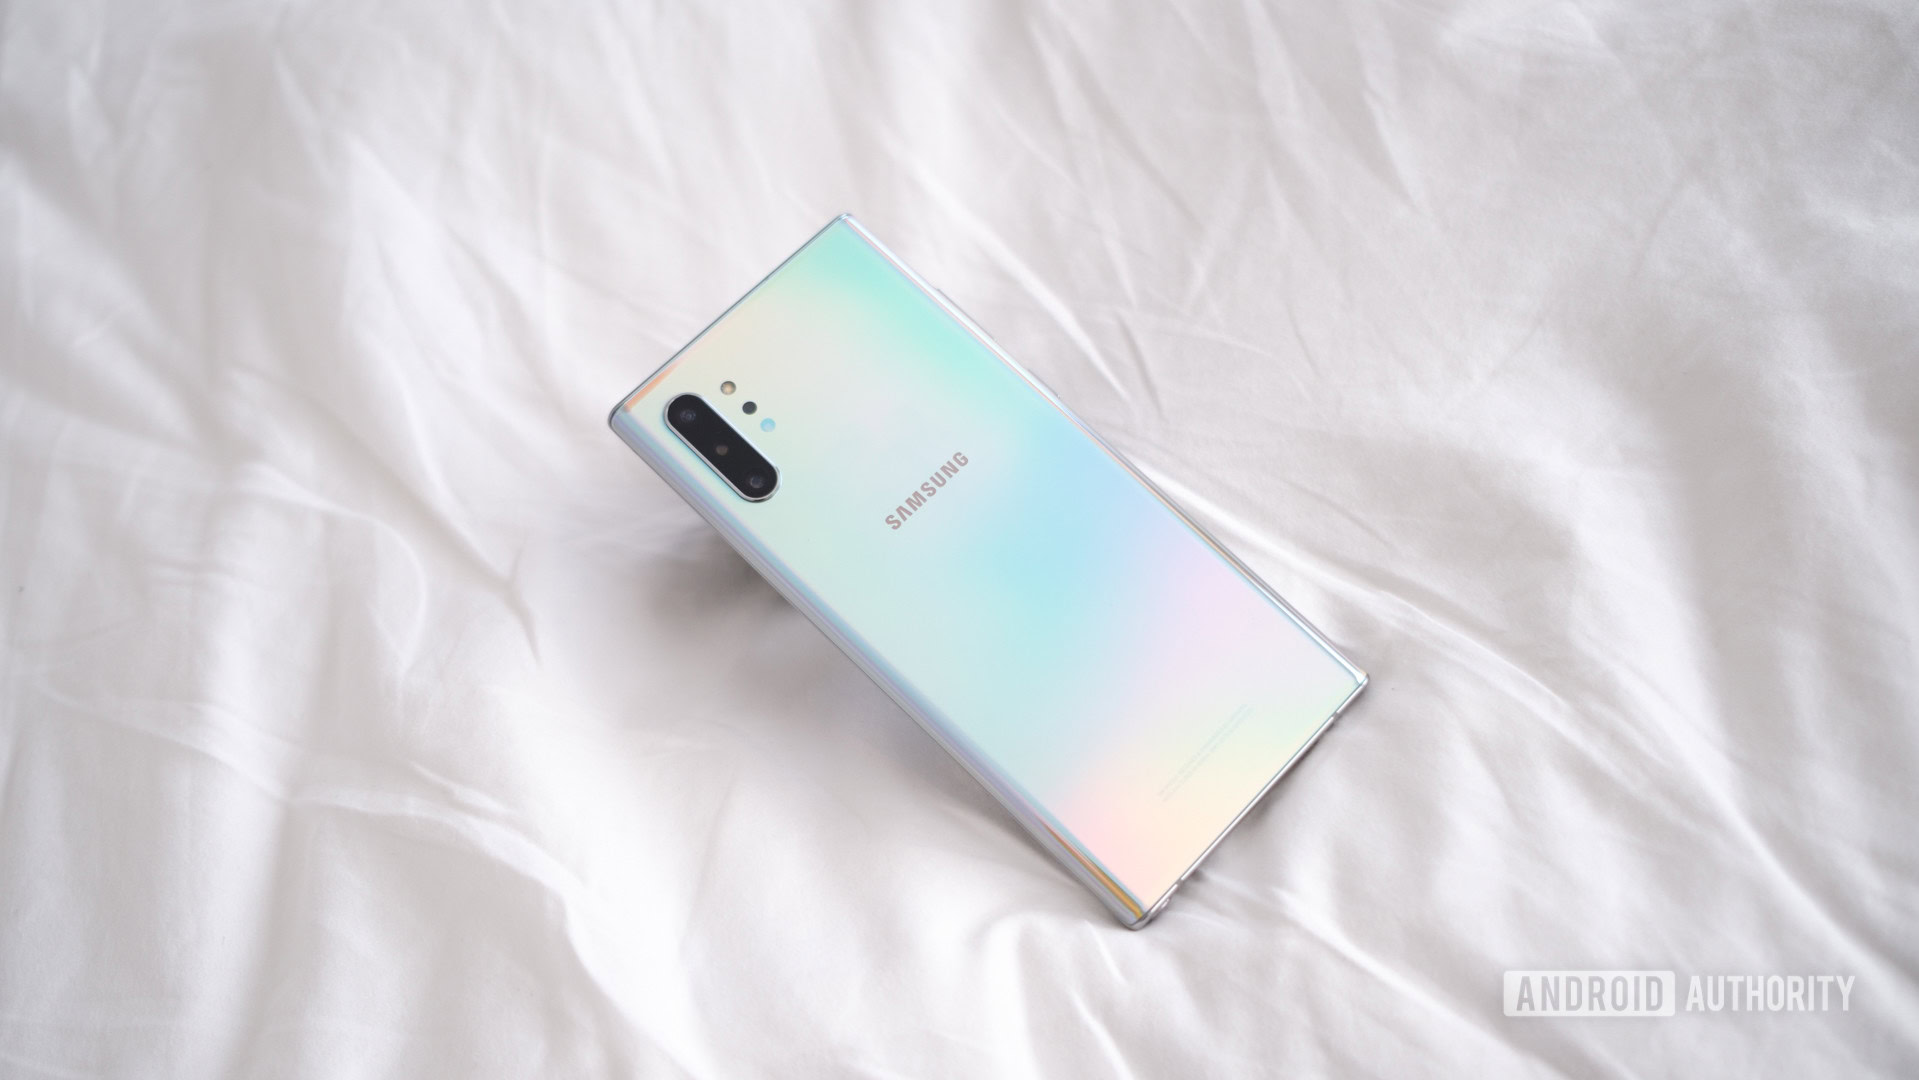 Samsung Galaxy Note 10: Is it worth the upgrade? - CNET